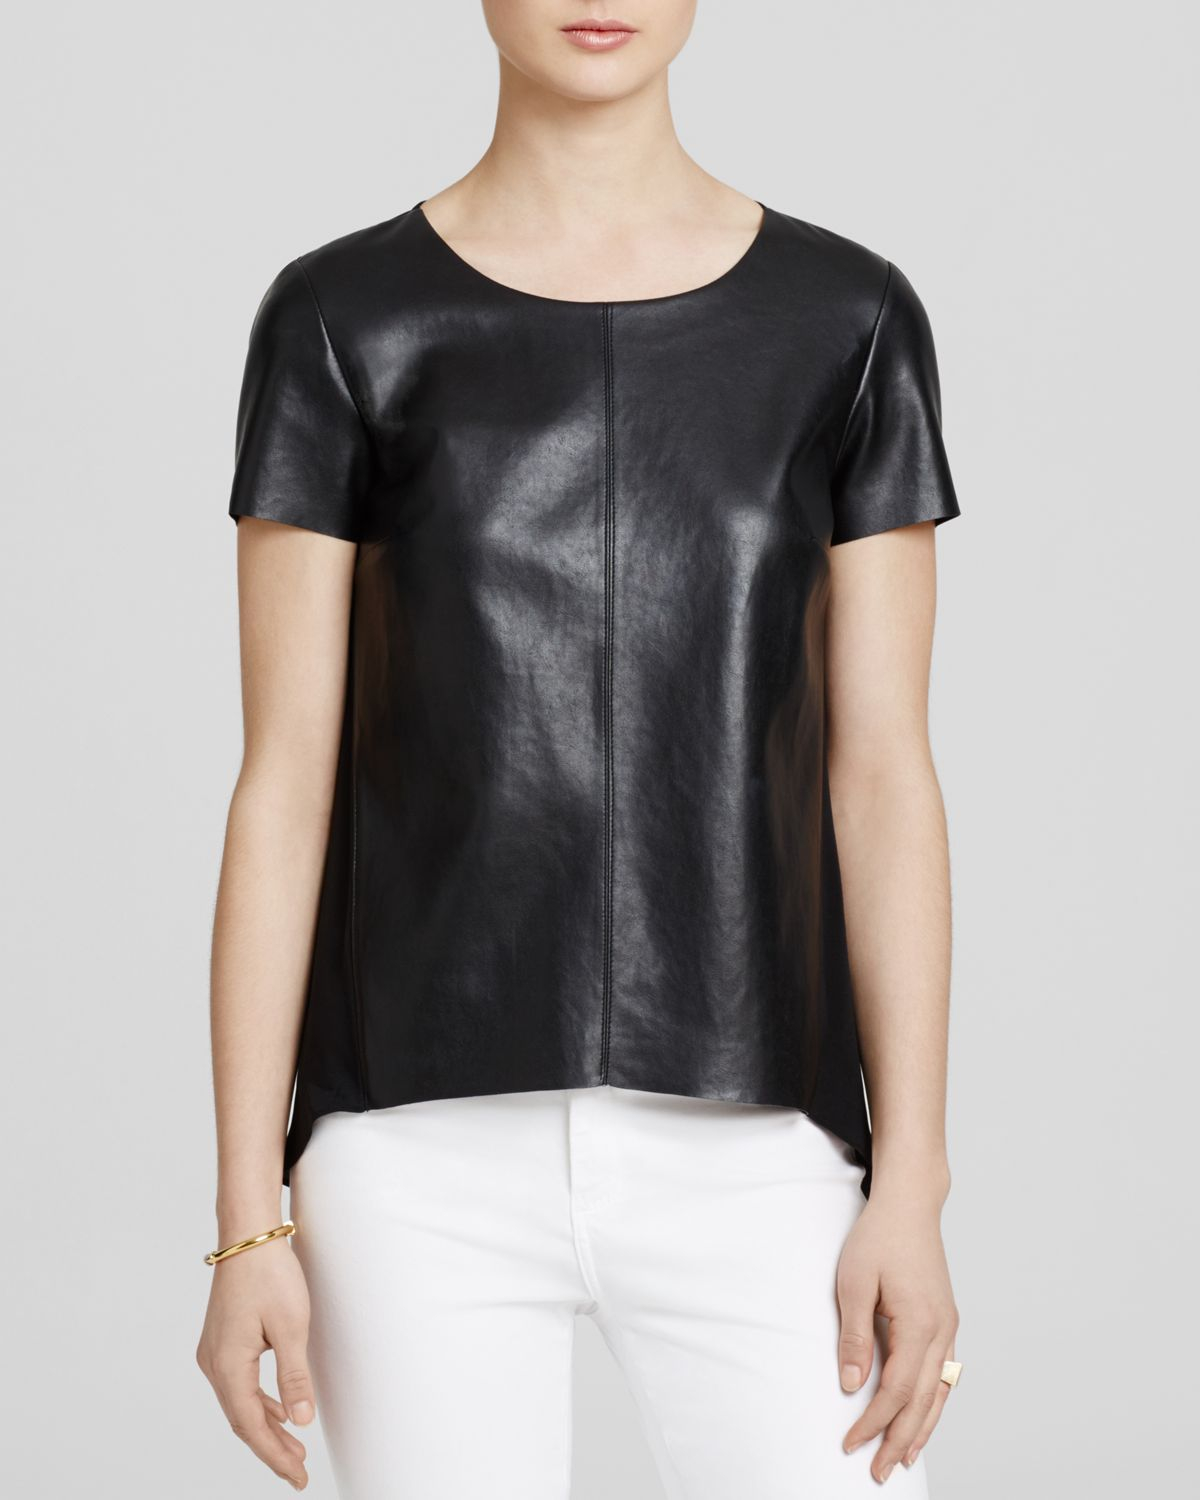 Lyst - Bailey 44 Calessino Faux Leather Top in Black